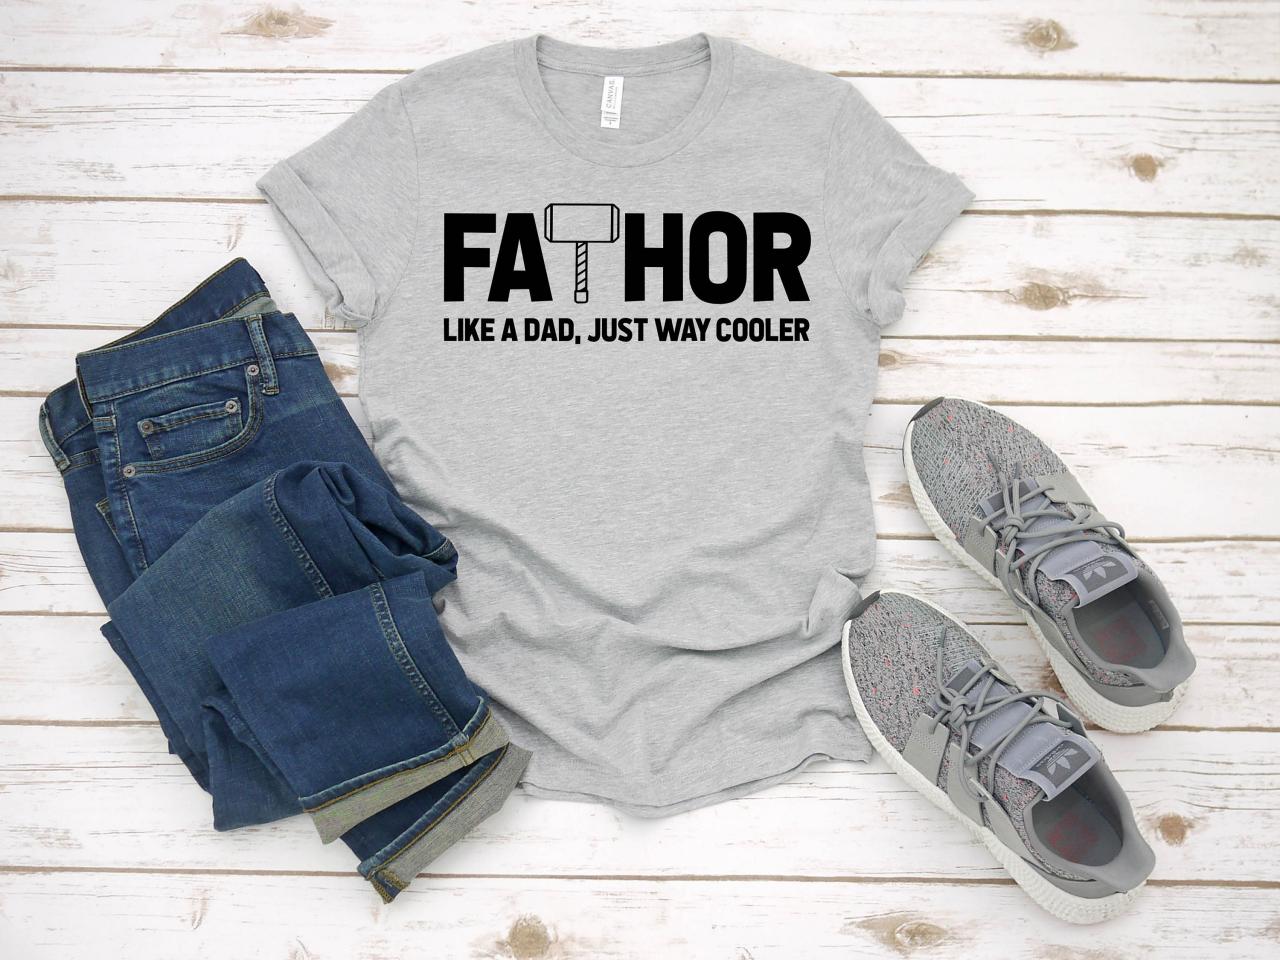 Father Day Gift T-shirt| Unique Father Gift Thor| Fathor Funny Gift For Dad| Fathers Day Gift